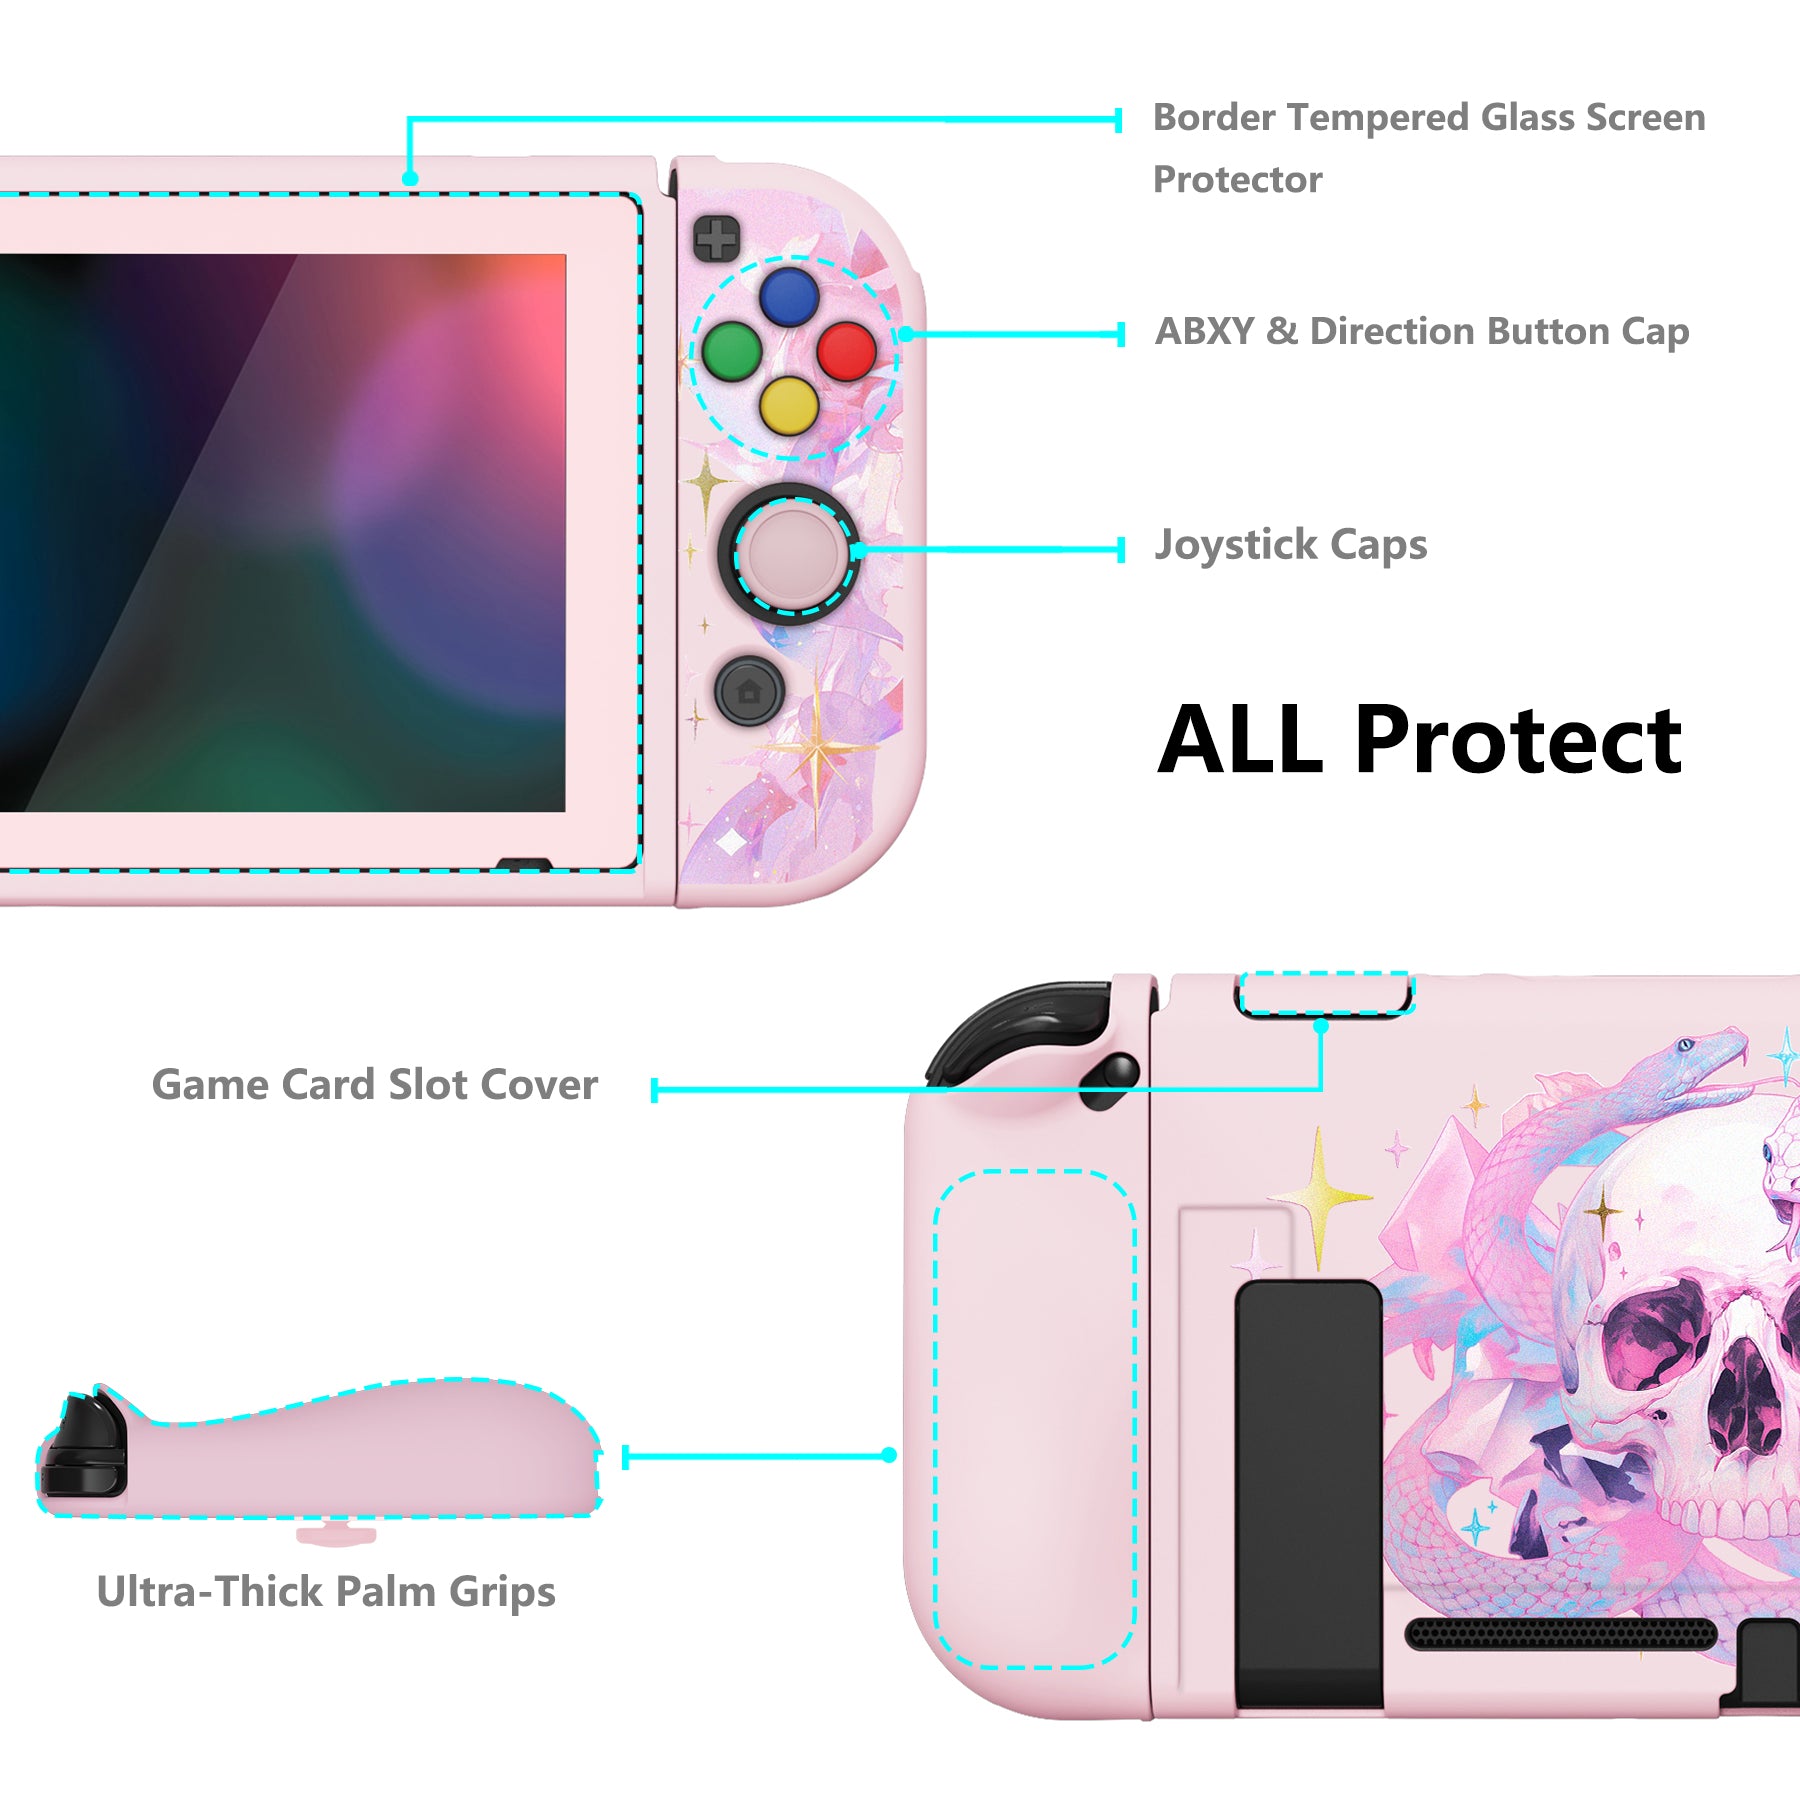 PlayVital ZealProtect Soft TPU Slim Protective Case with Tempered Glass Screen Protector & Thumb Grips & ABXY Direction Button Caps for NS Switch - Celestial Serpent's Embrace - RNSYV6057 playvital